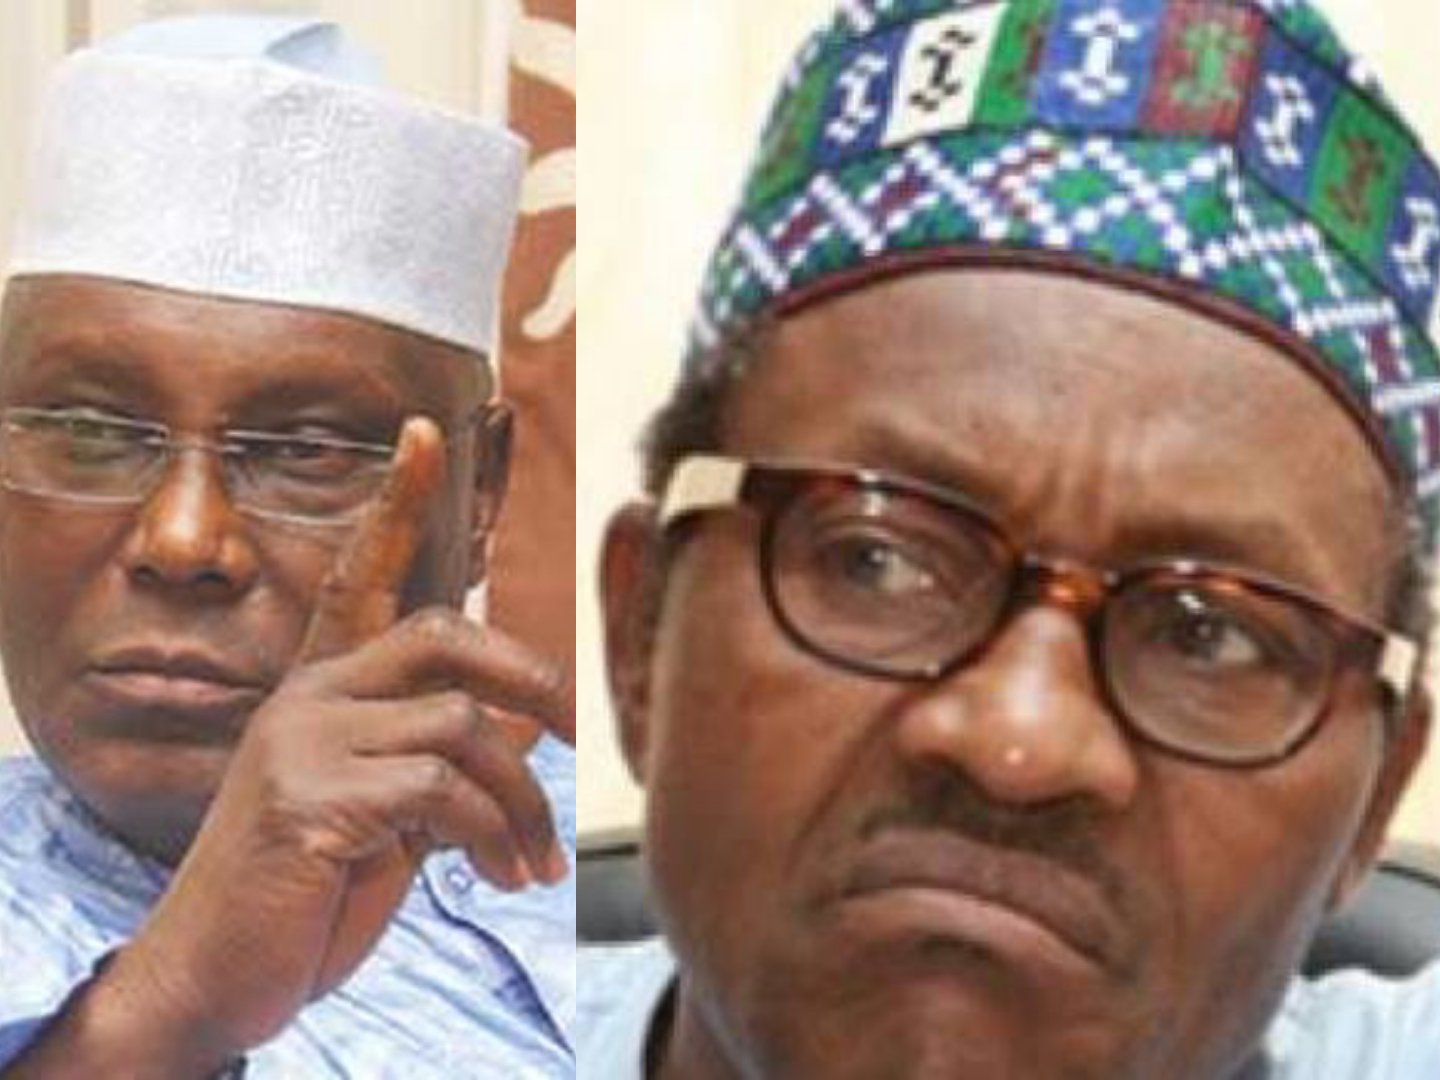 "Sell Presidential Jets, Cancel ₦27bn For NASS Renovation" - Atiku To Buhari's Govt. On Budget Review